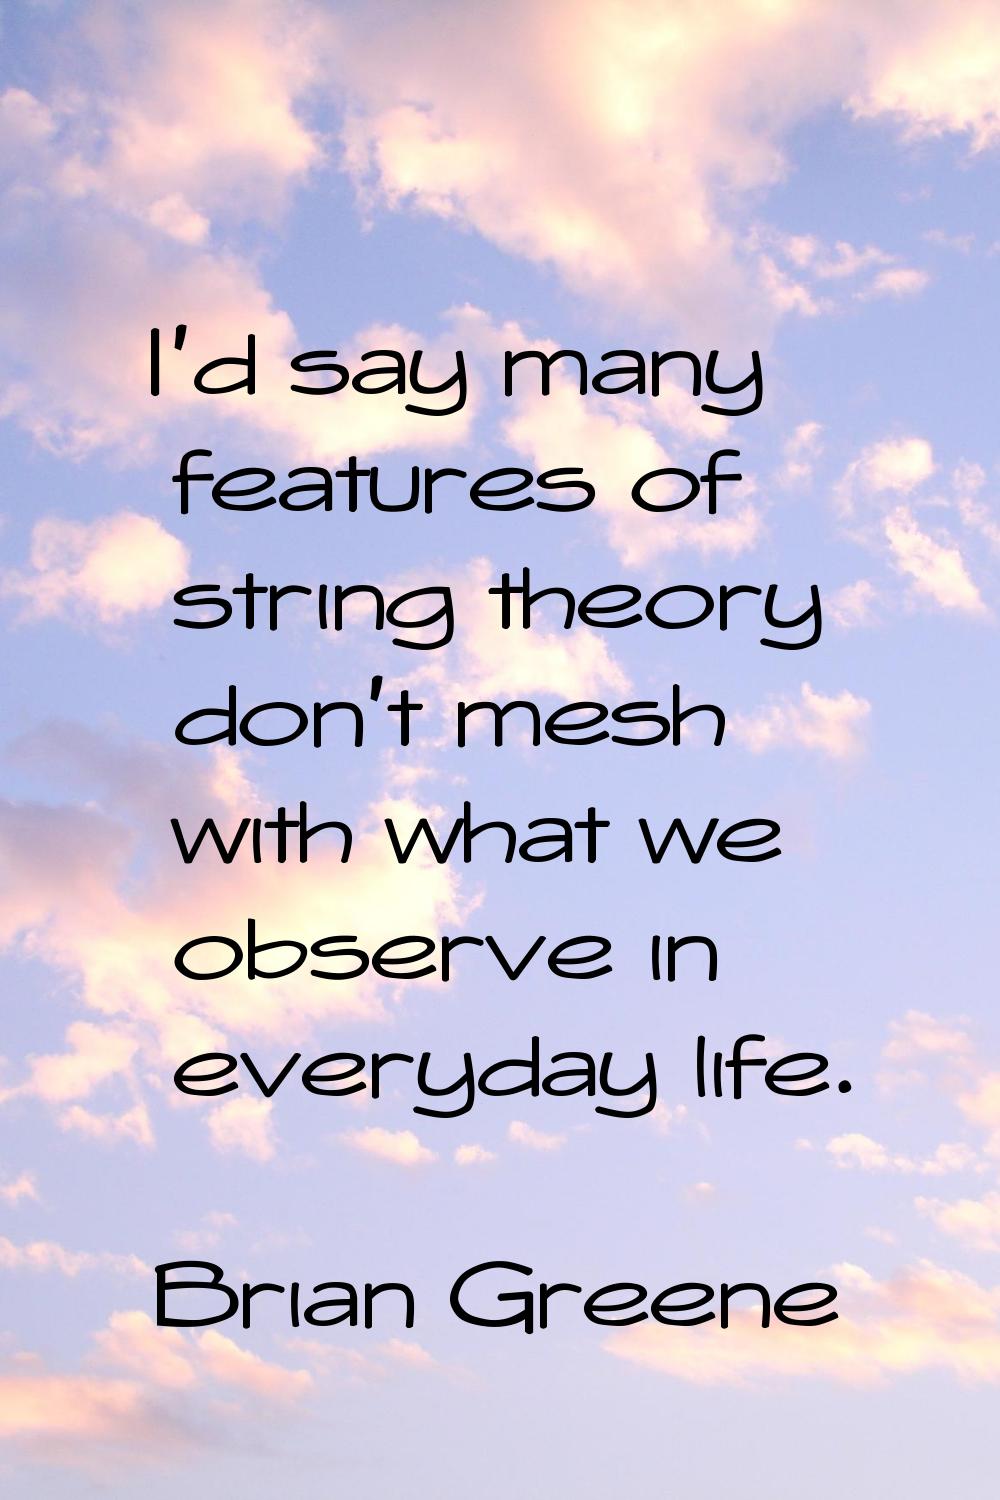 I'd say many features of string theory don't mesh with what we observe in everyday life.